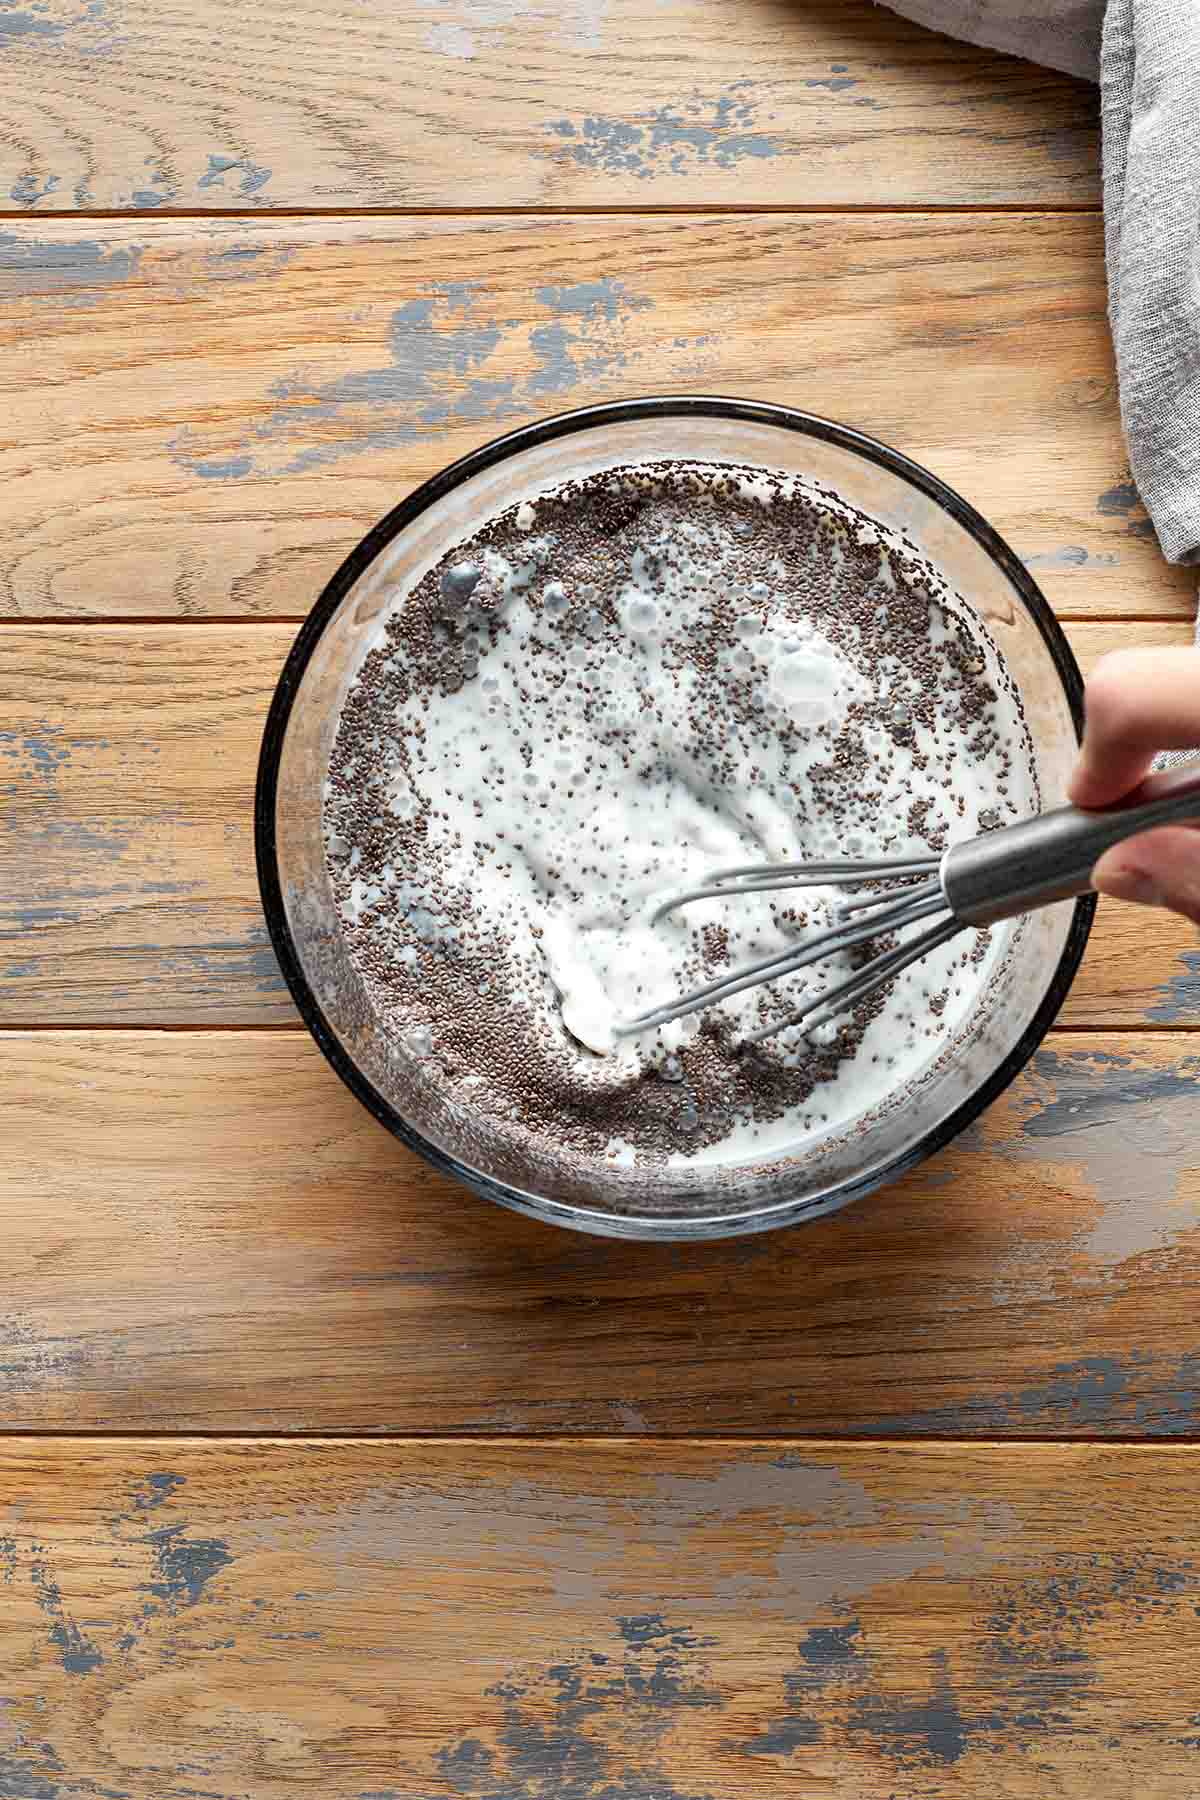 Chia seeds being whisked together with milk and maple syrup.